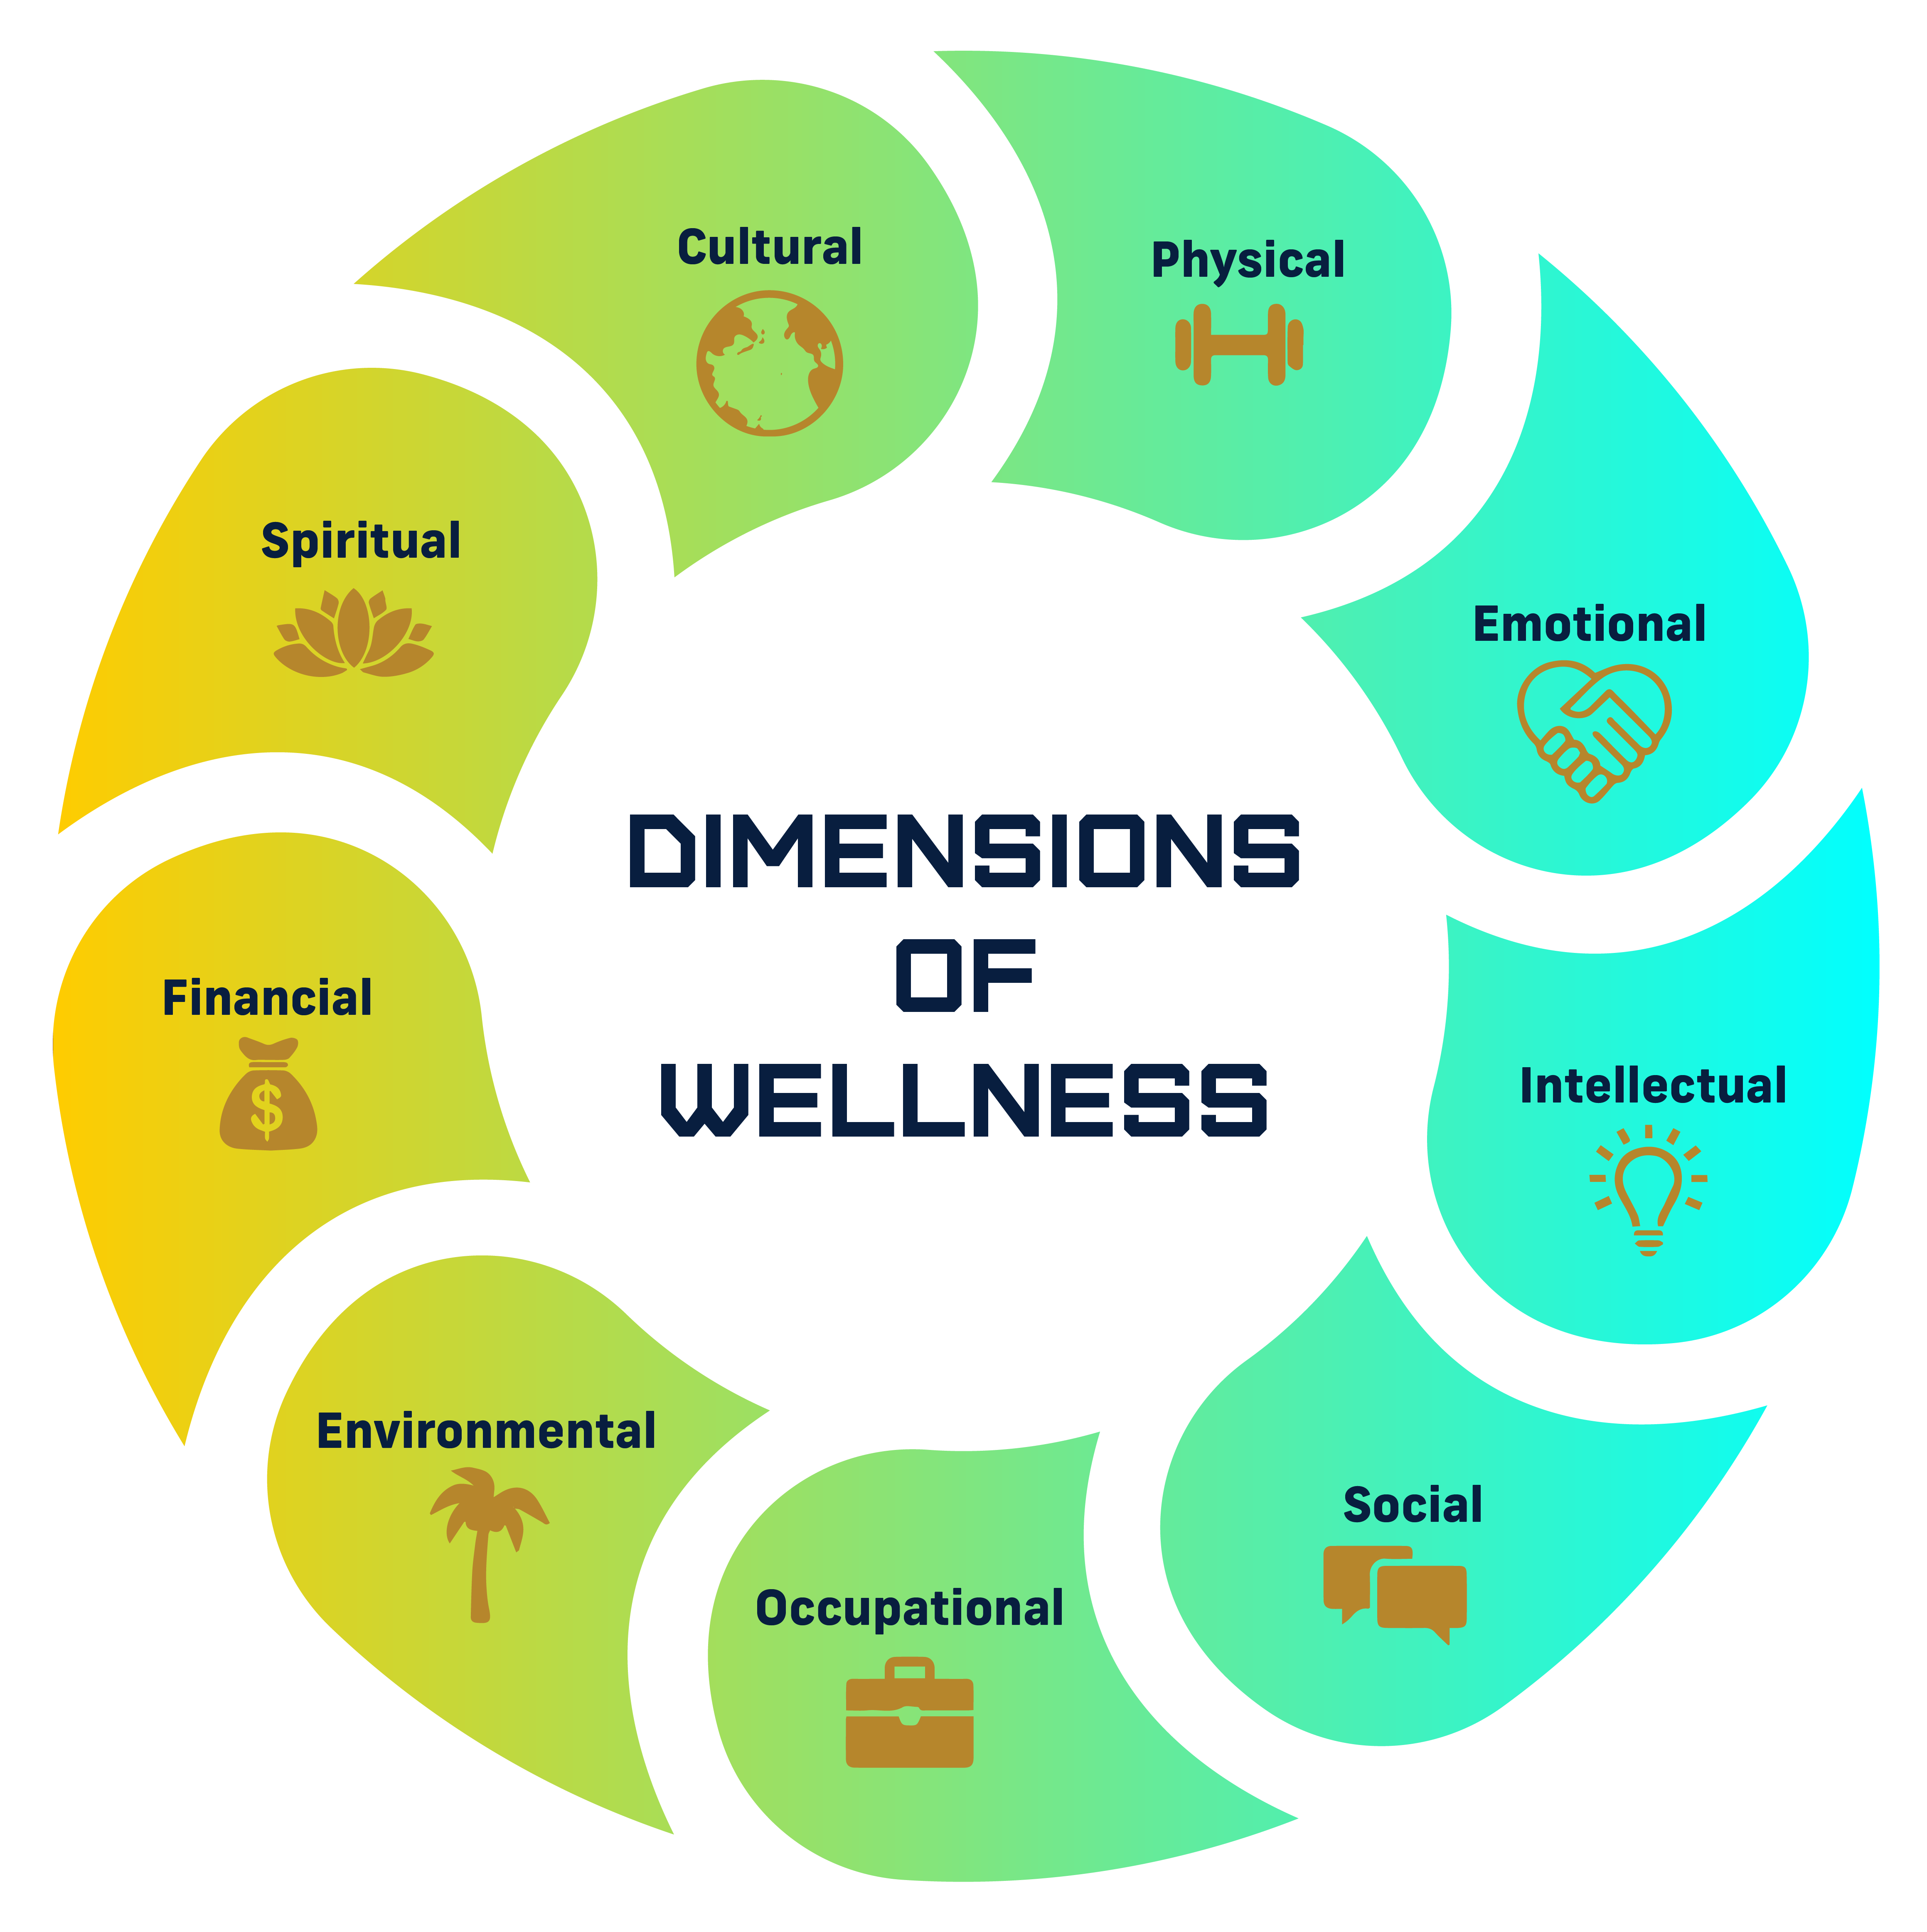 nine dimensions of wellness: physical, emotional, intellectual, social, occupational, environmental, financial, spiritual, and cultural